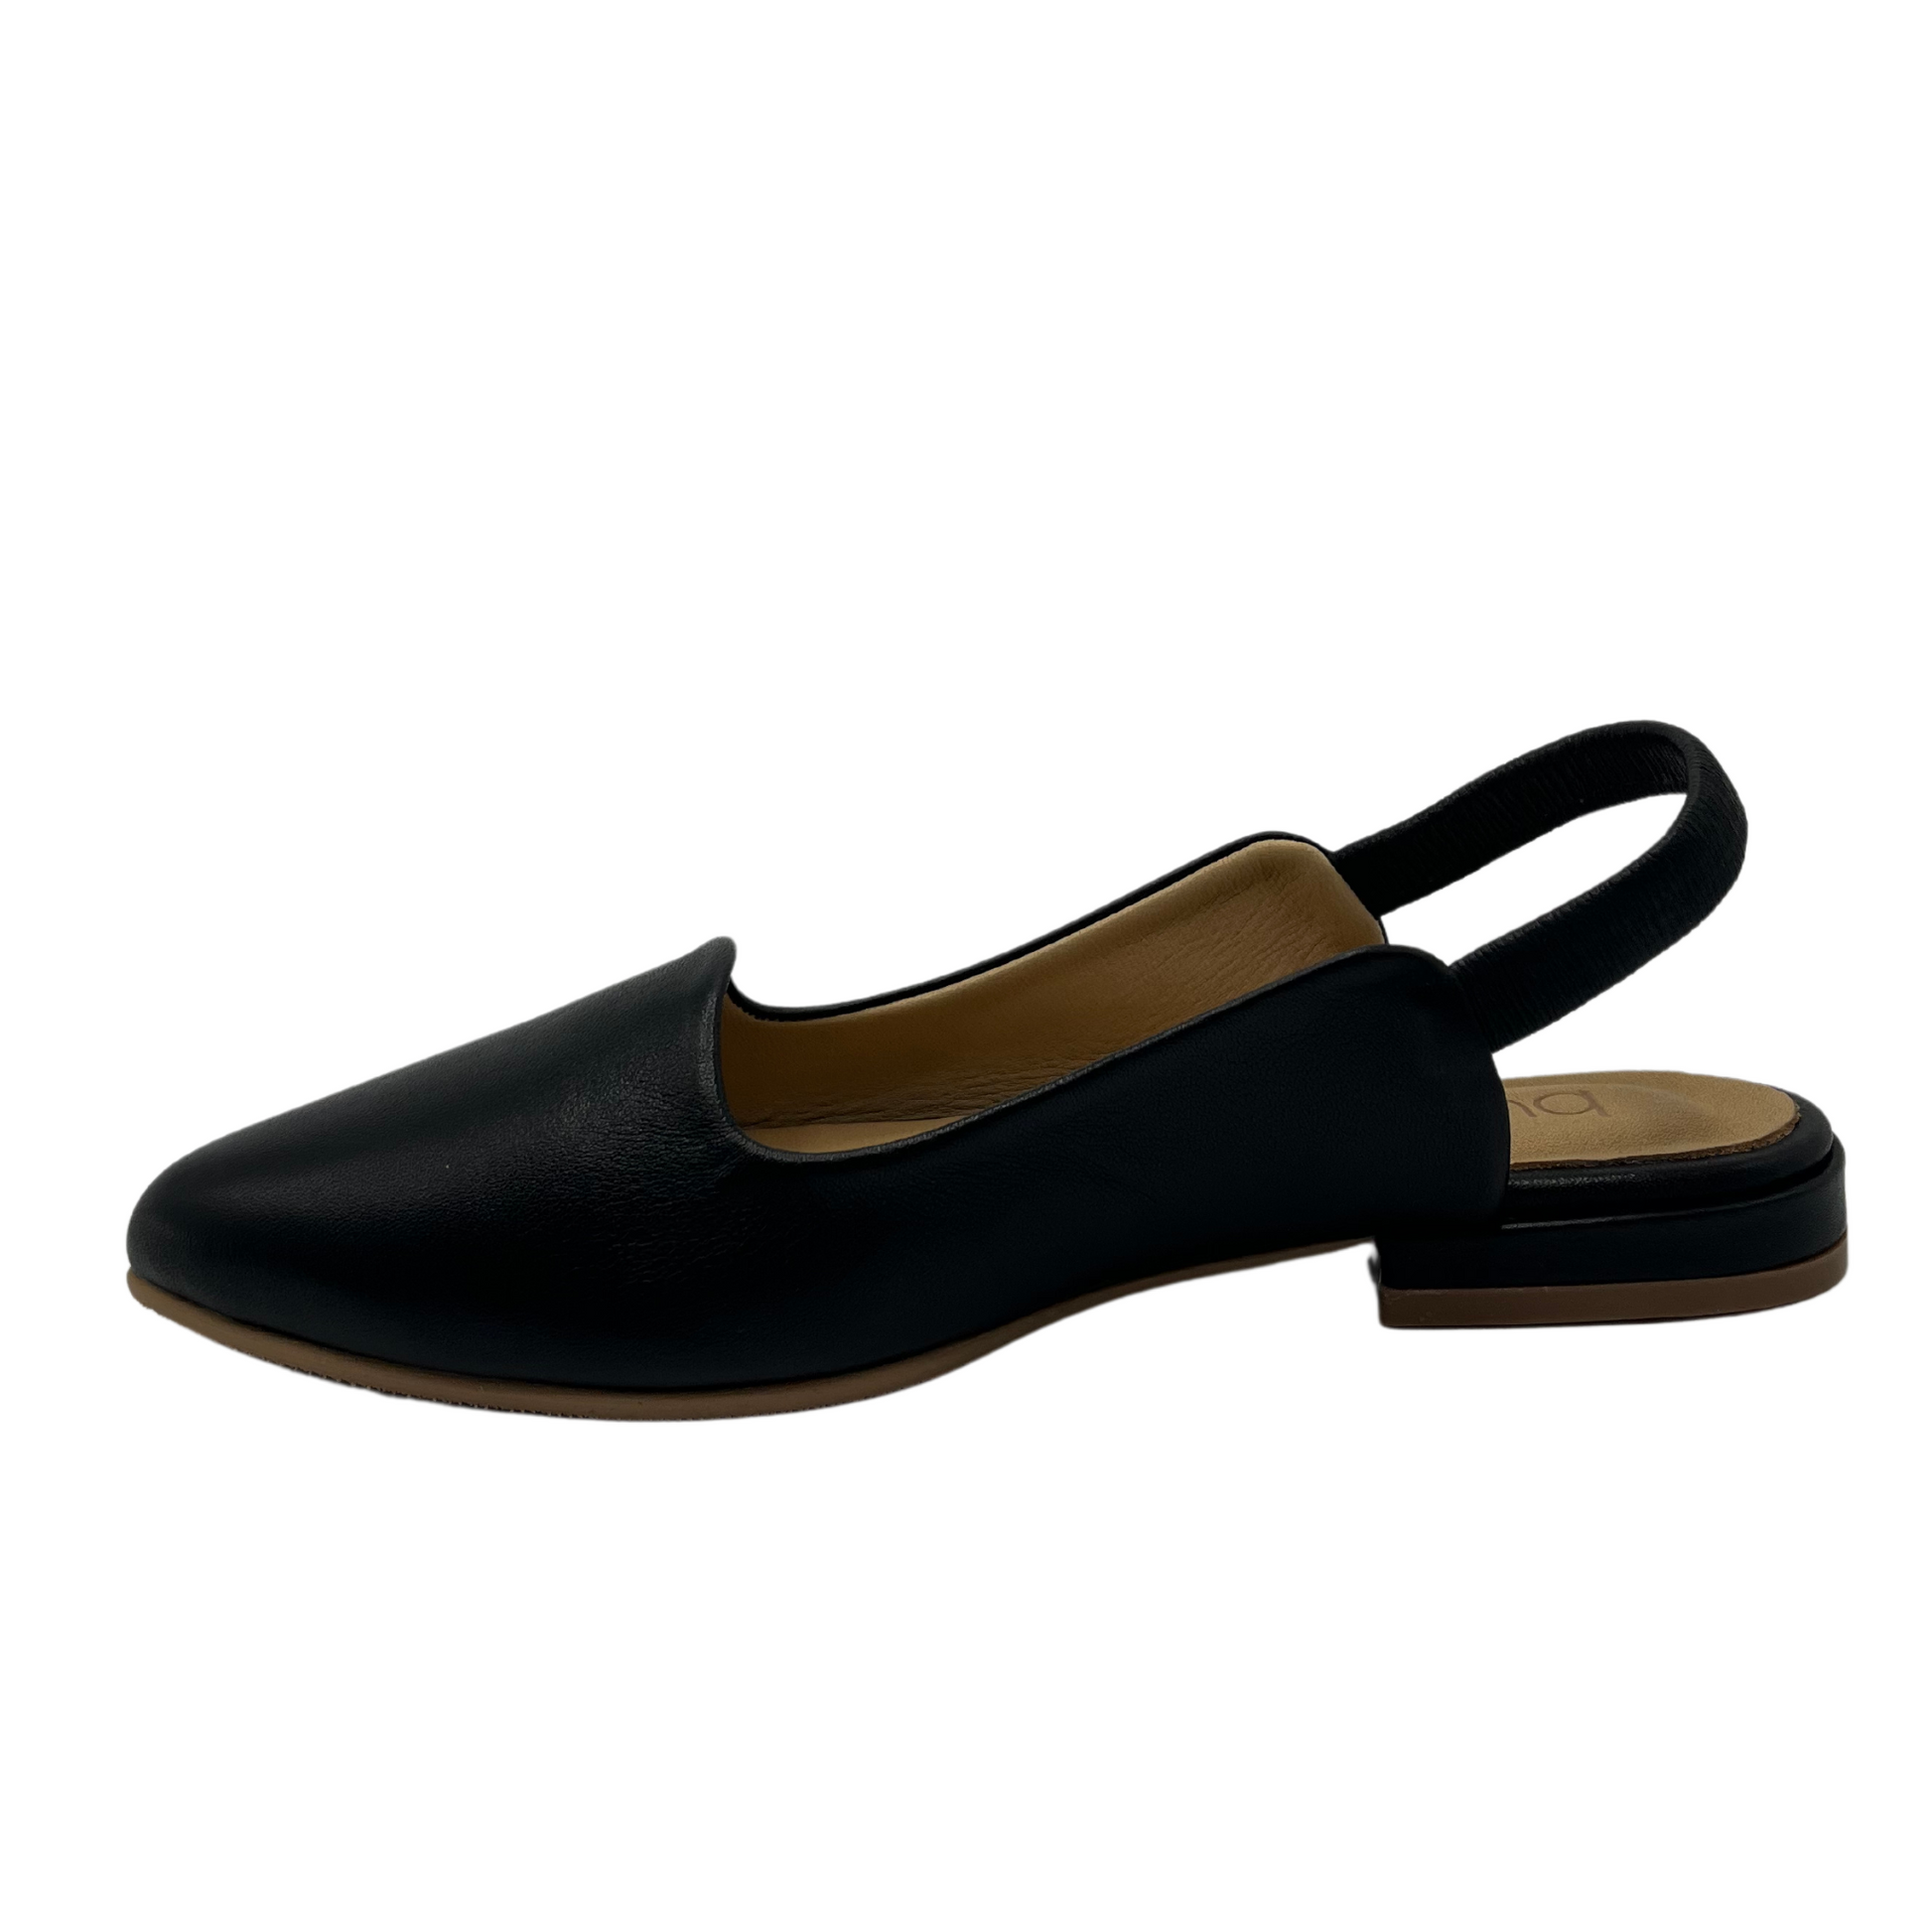 Left facing view of black leather flat shoe with pointed toe and slingback strap